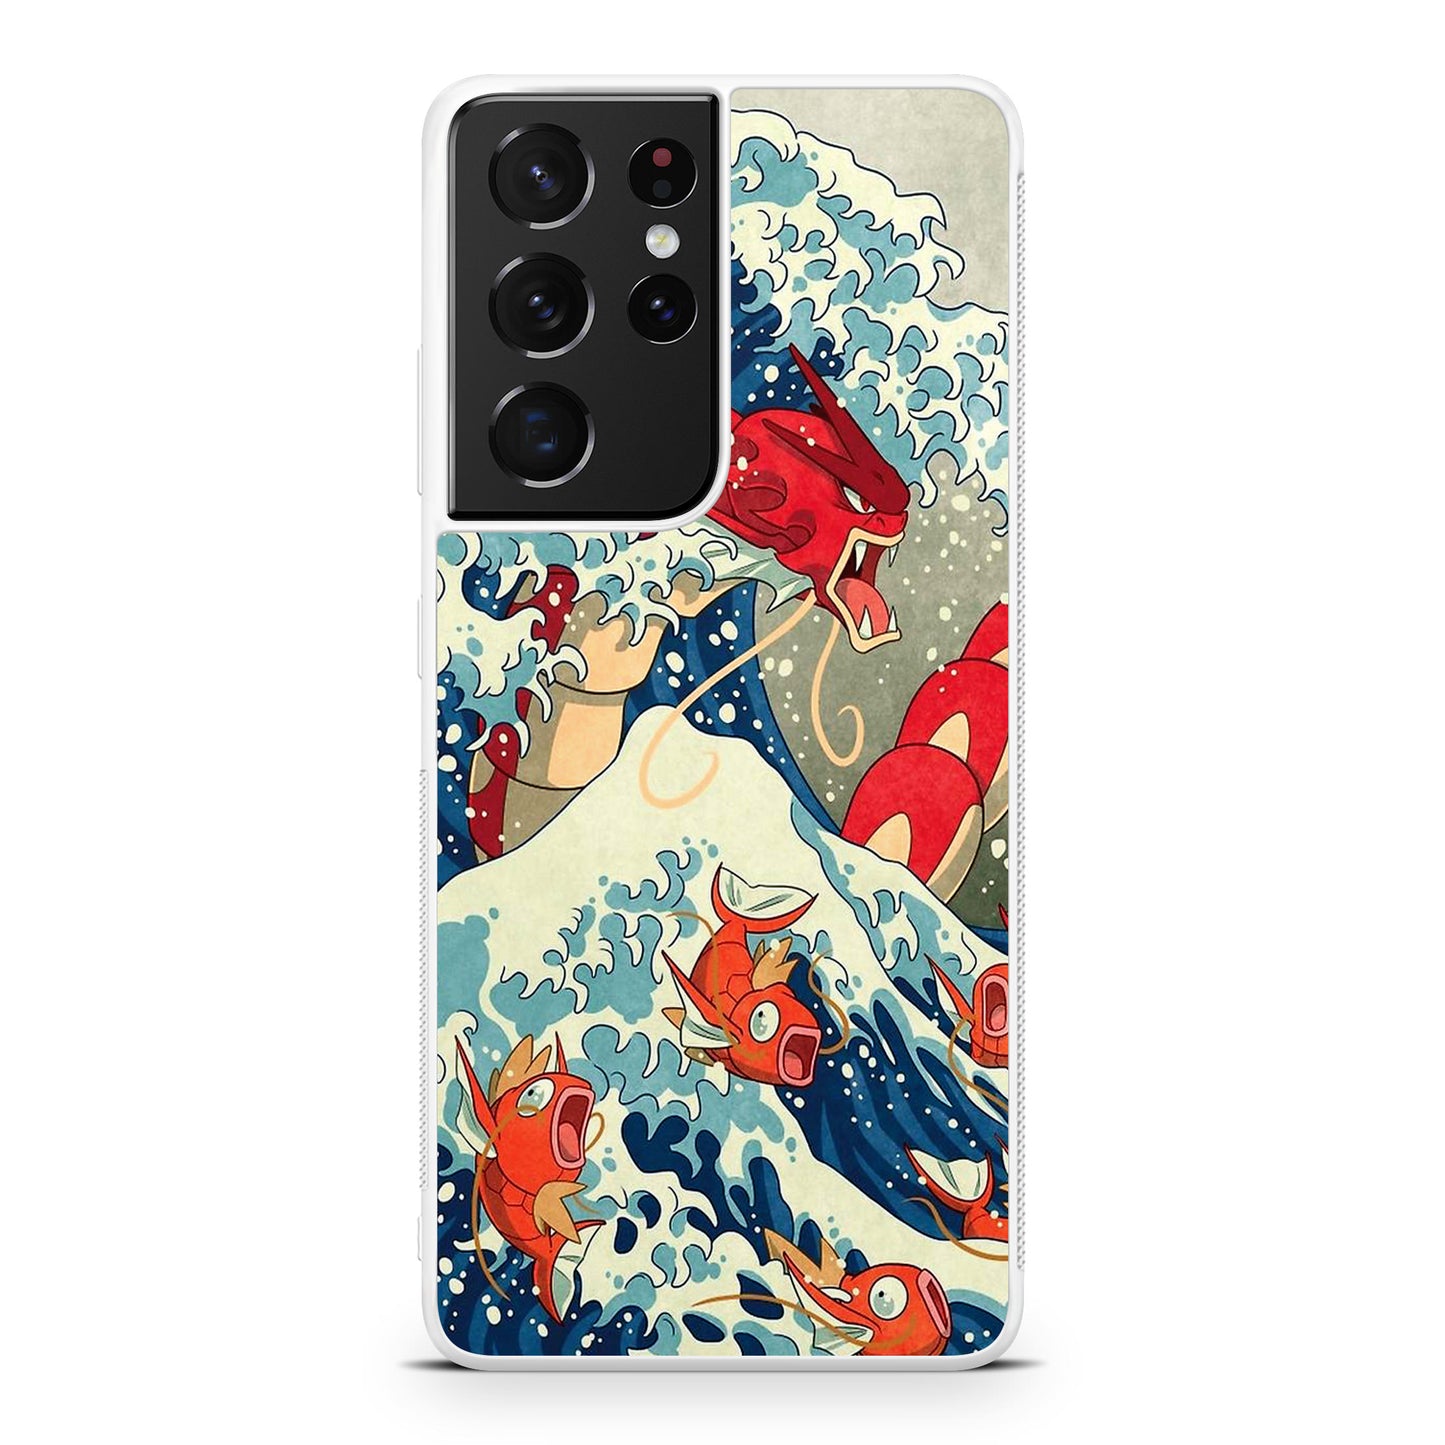 The Great Wave Of Gyarados Galaxy S21 Ultra Case